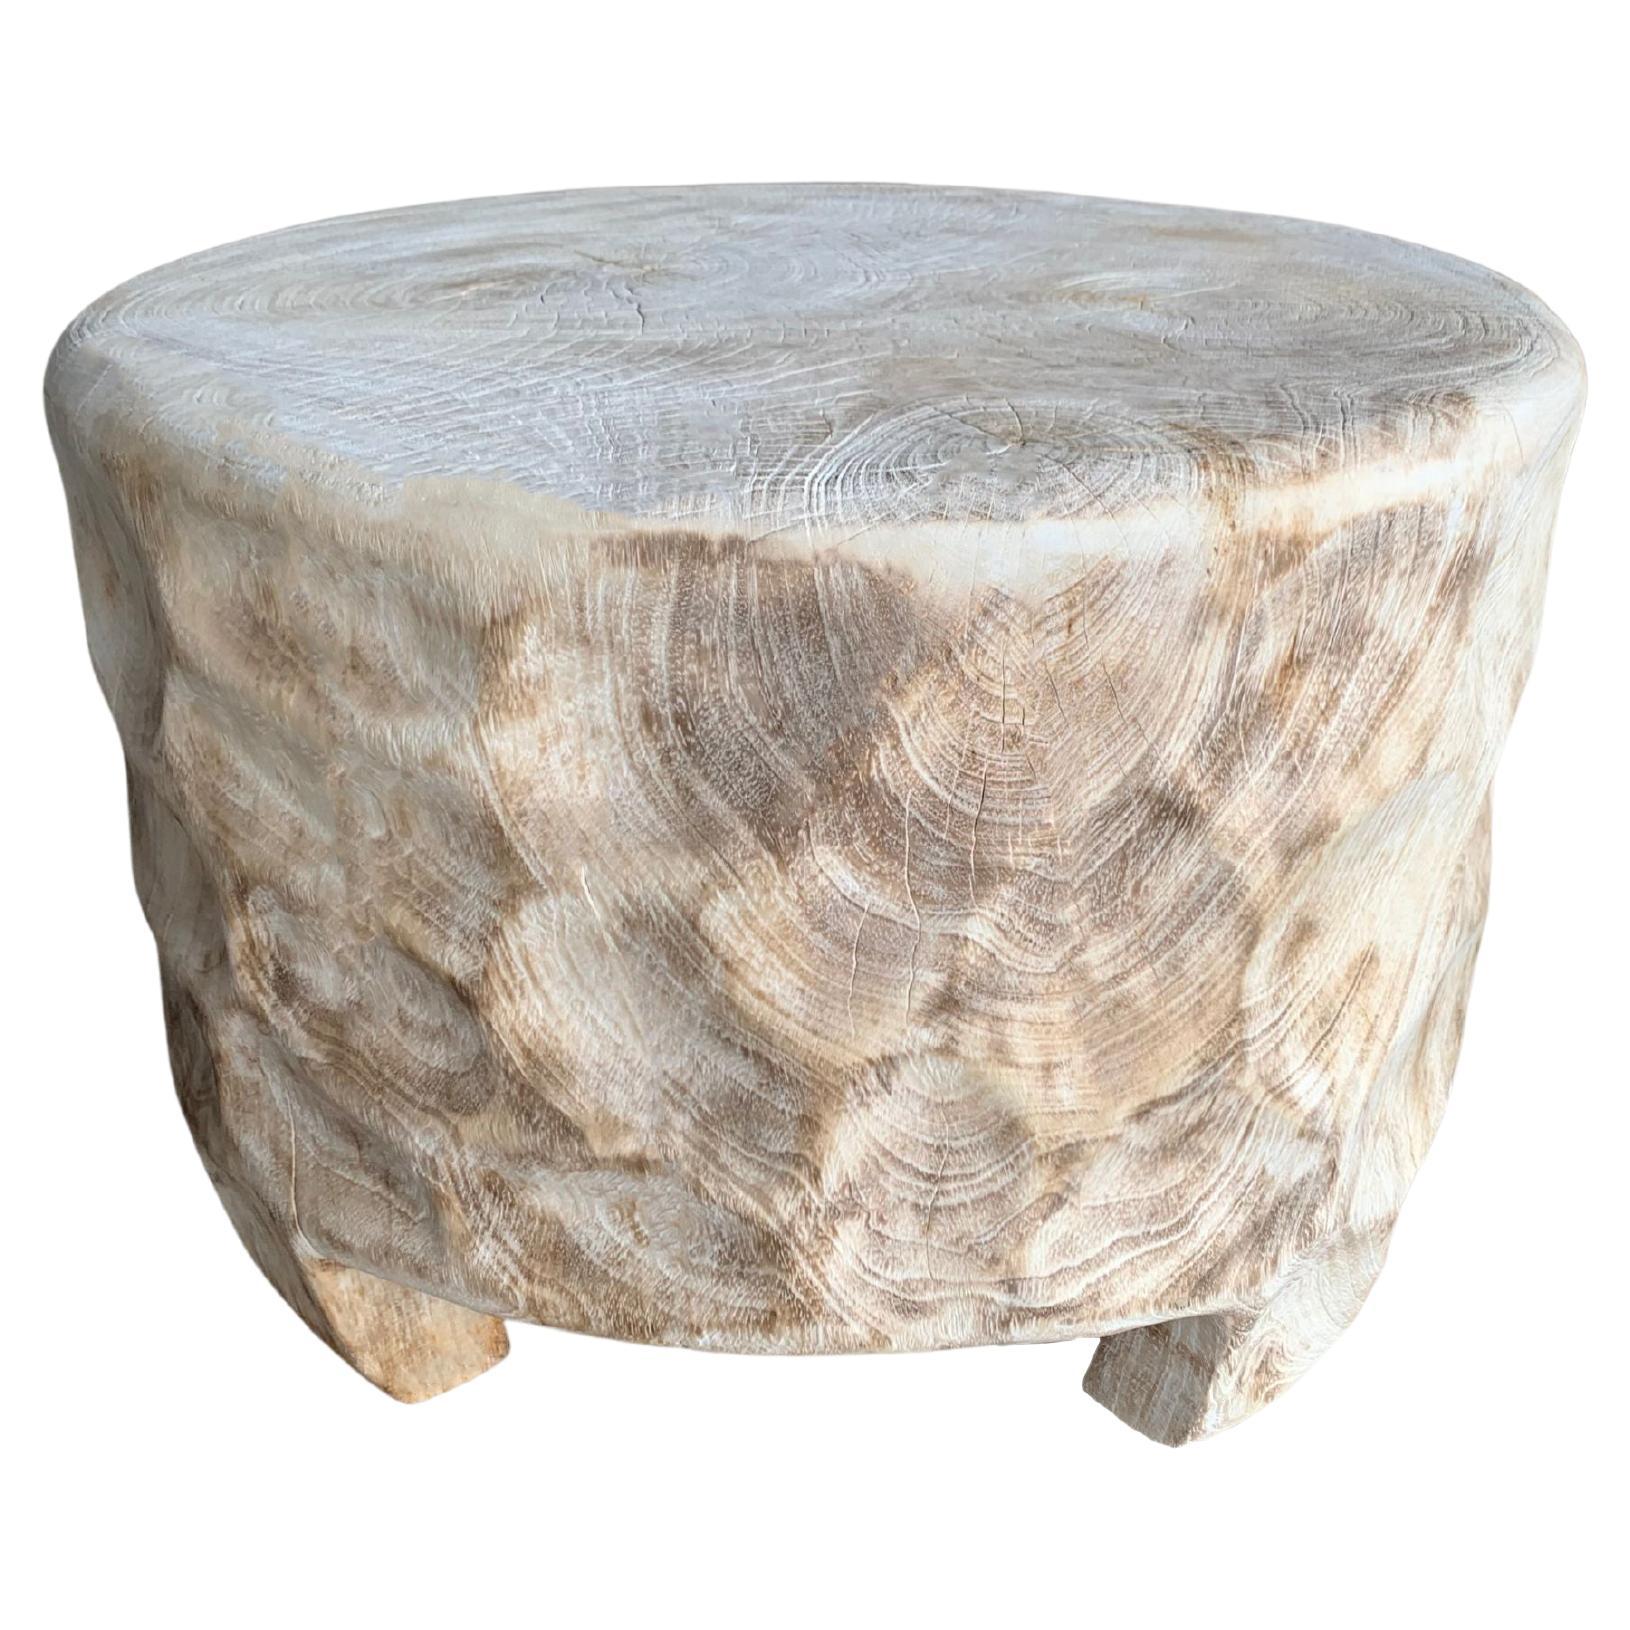 Side Table Mango Wood Bleached Finish Hand-Hewn Detailing